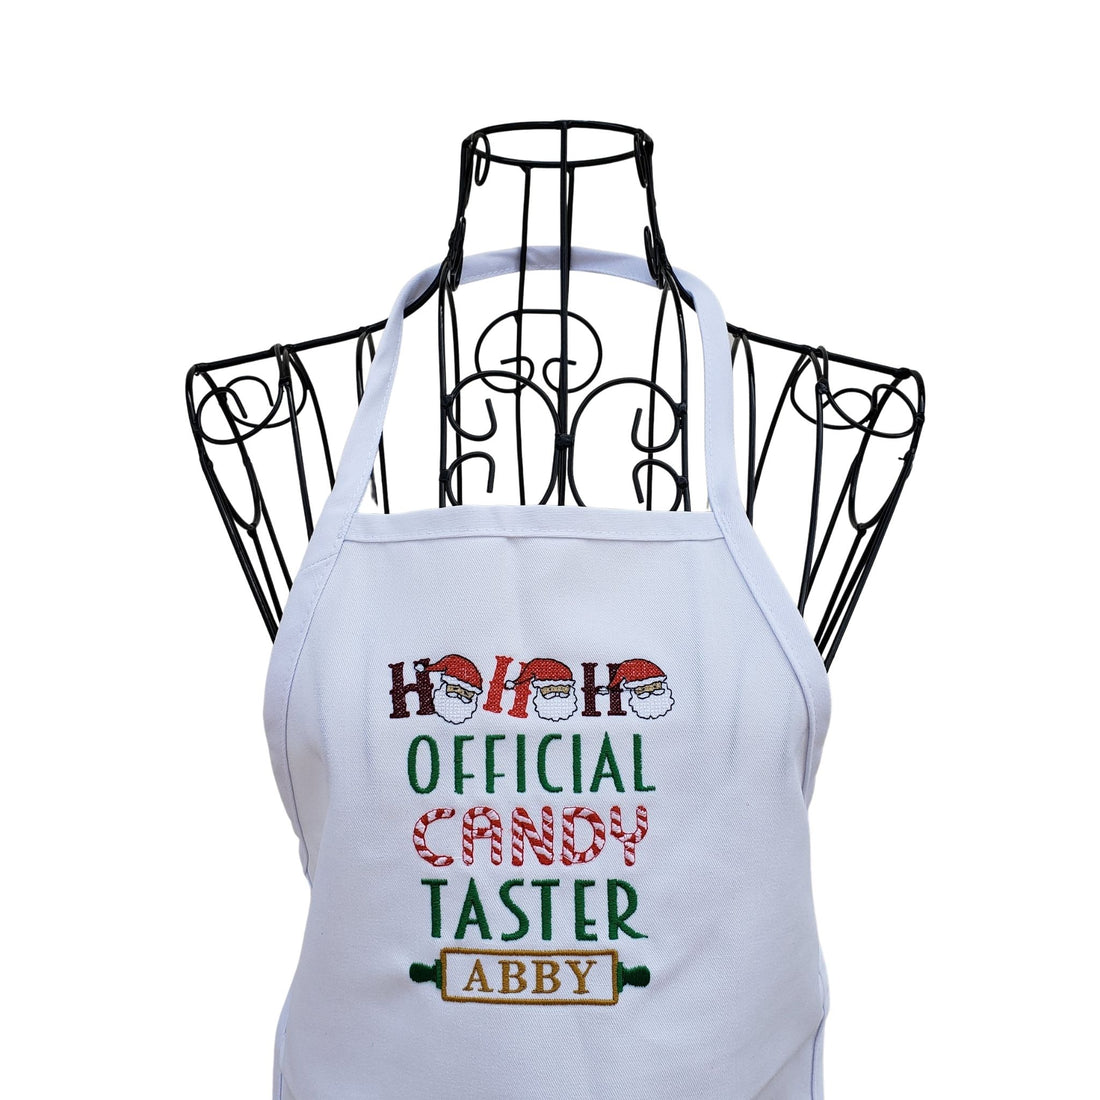 Custom Official Candy Taster embroidered apron - Life Has Just Begun